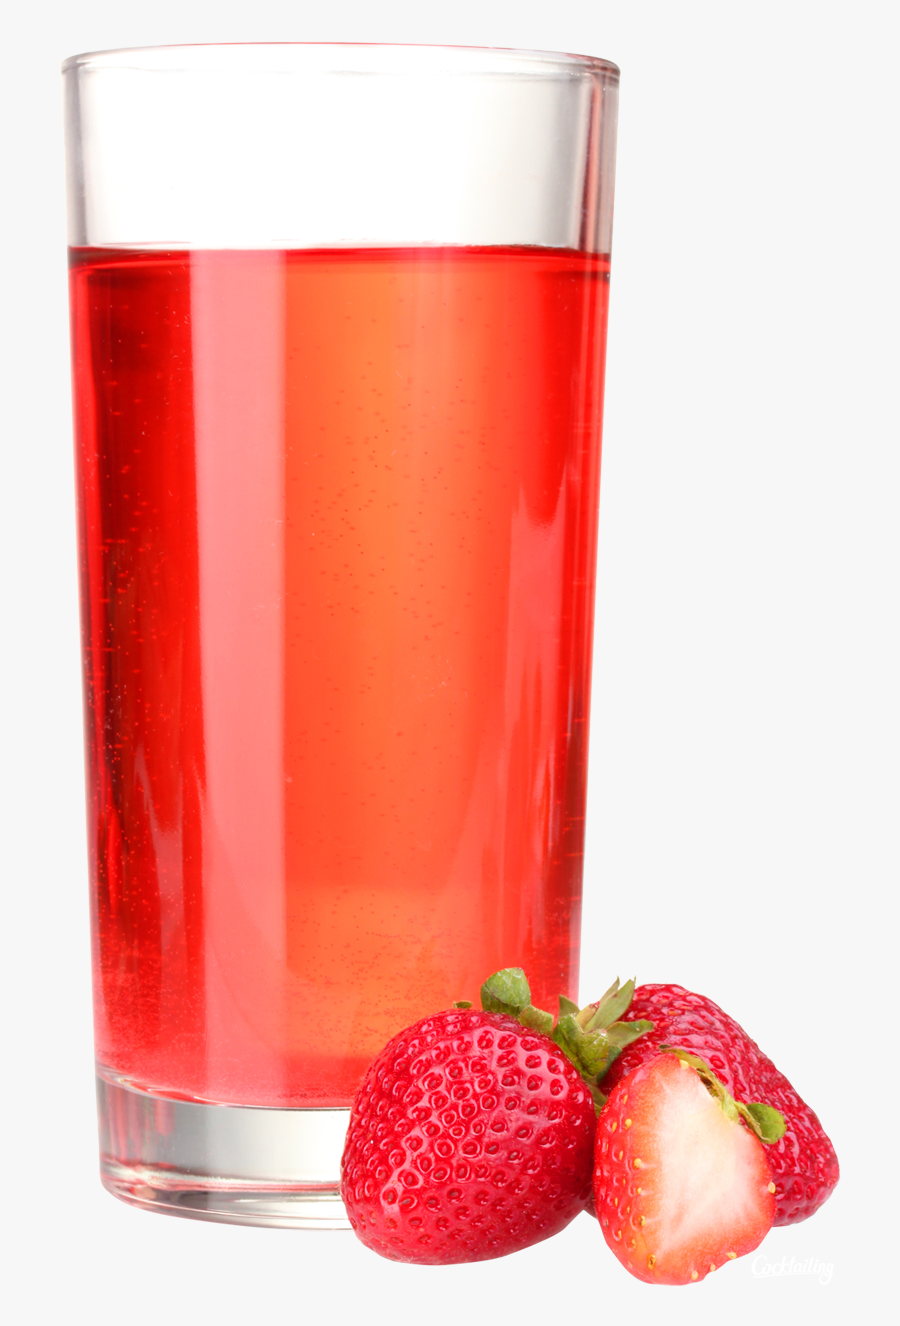 Strawberryjuice Png Image Purepng - Fruits Juice Glass Png, Transparent Clipart